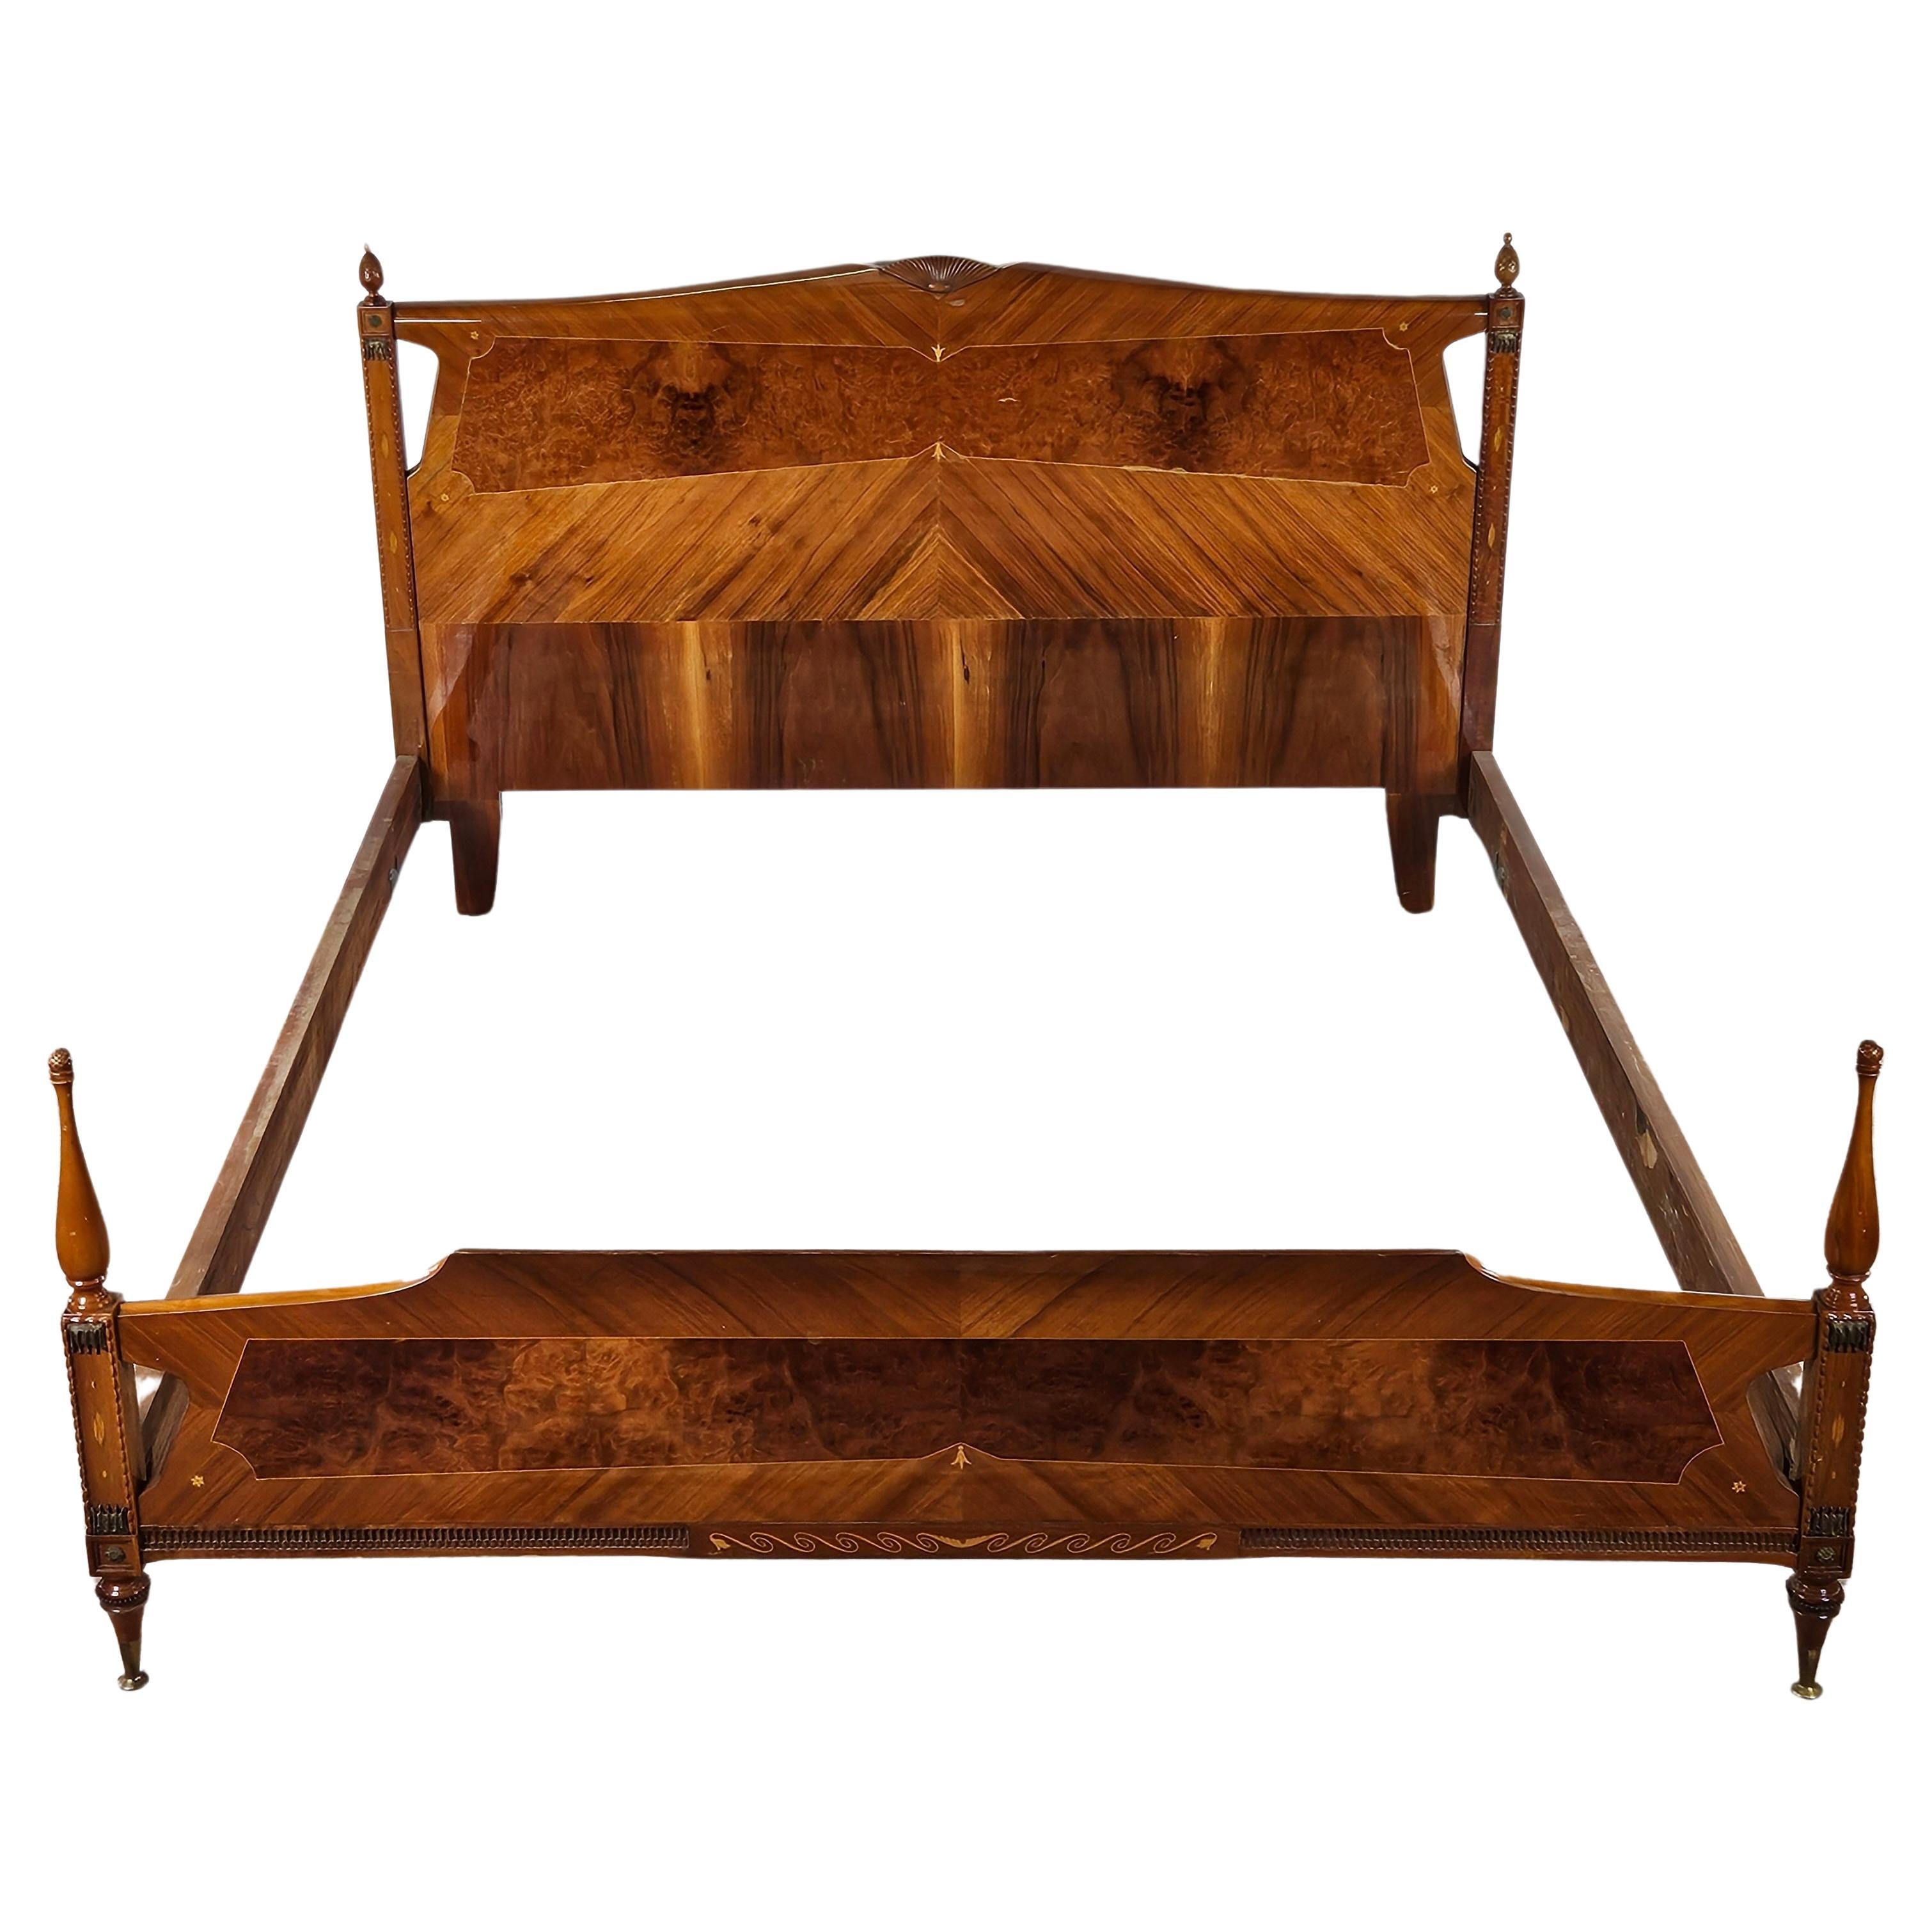 1960s double bed inlaid with briarwood and brass decorations For Sale